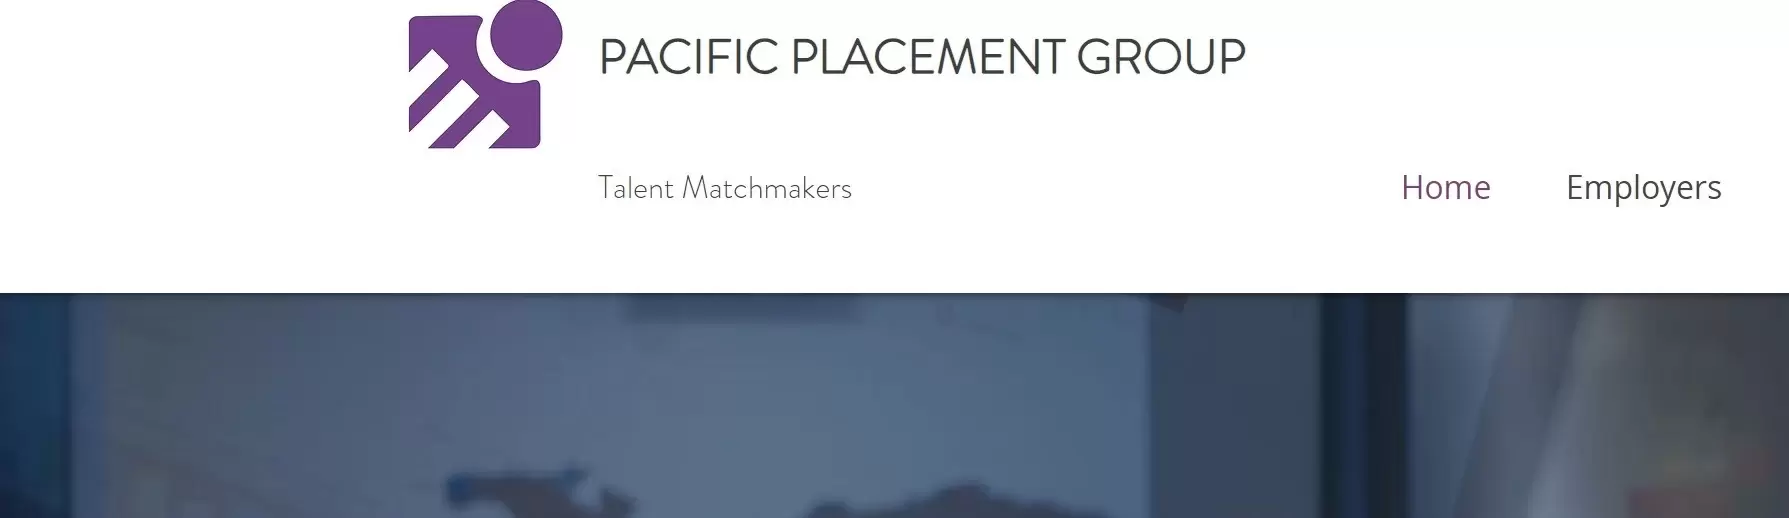 Pacific Placement Group company profile and reviews